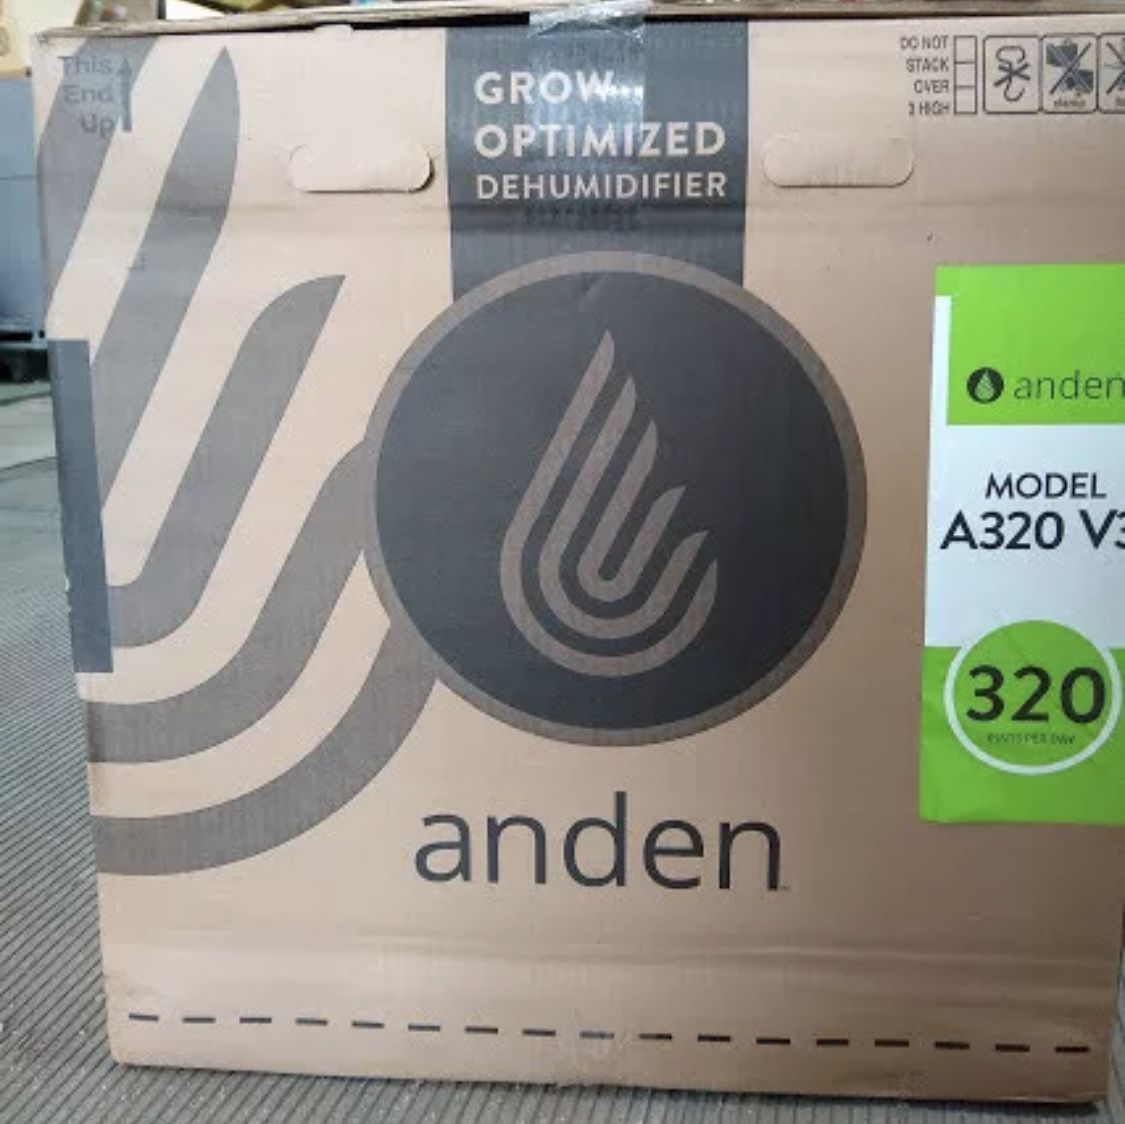 Dehumidifier Anden 320 (comes in 240v and 277v